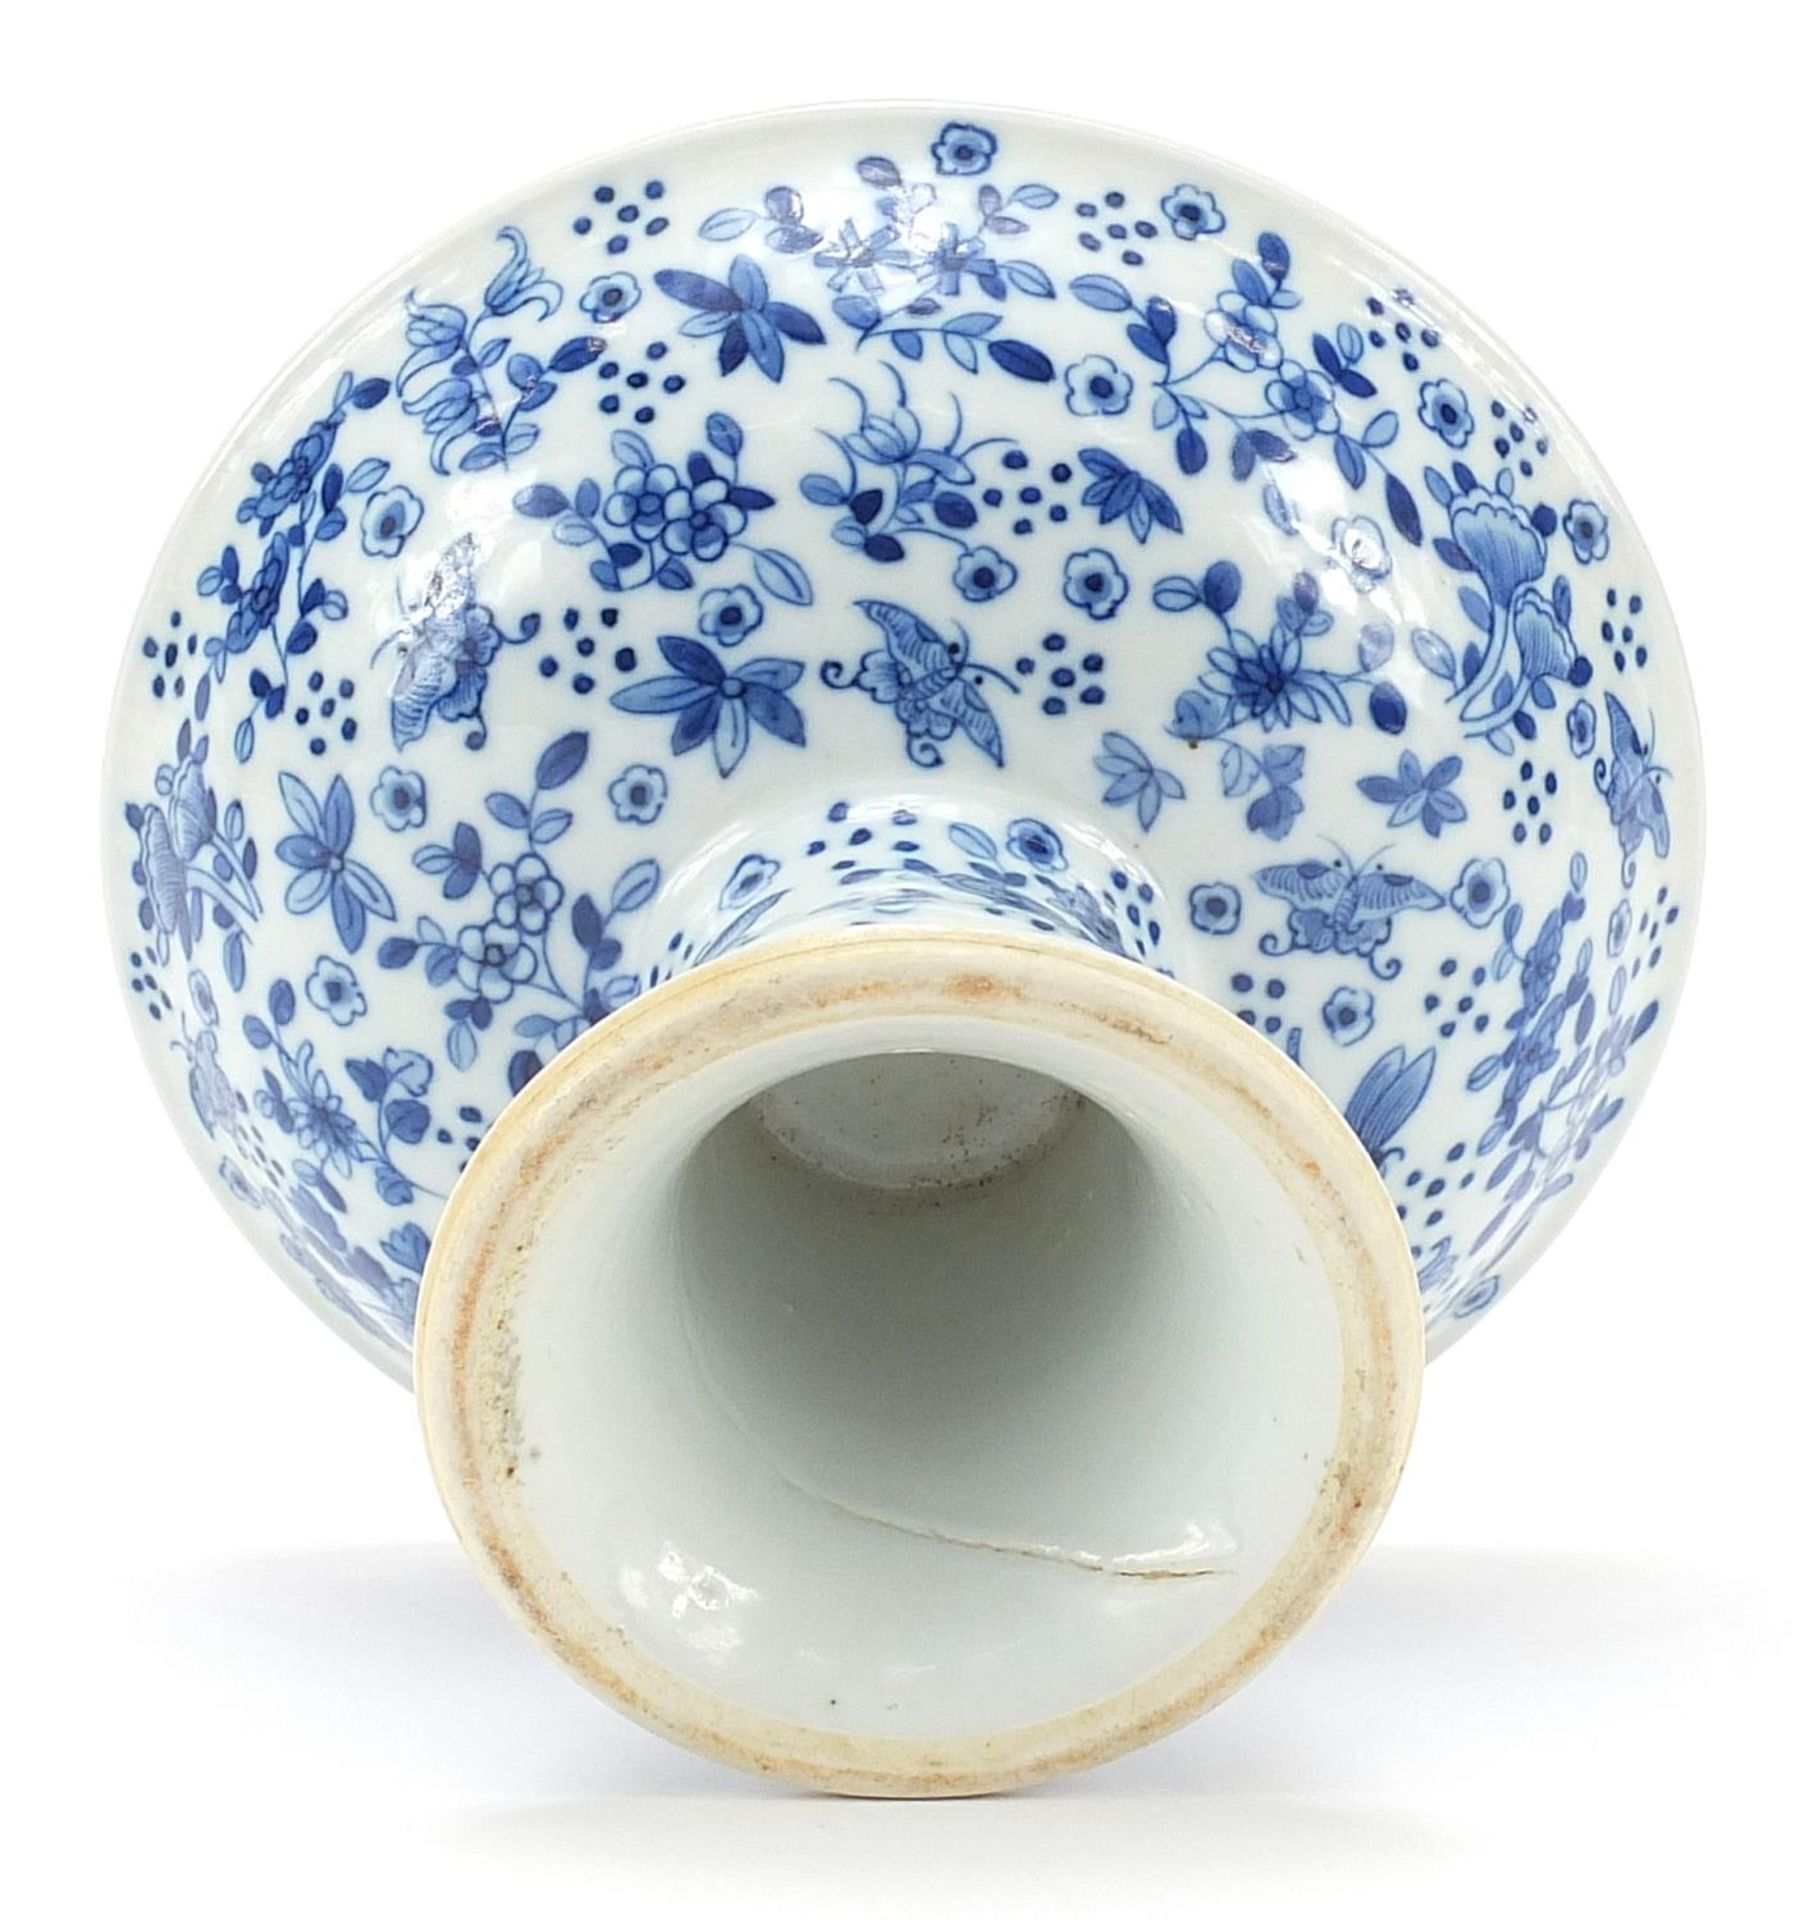 Chinese blue and white porcelain stem dish hand painted with flowers, 14cm high x 21cm in diameter - Image 4 of 4